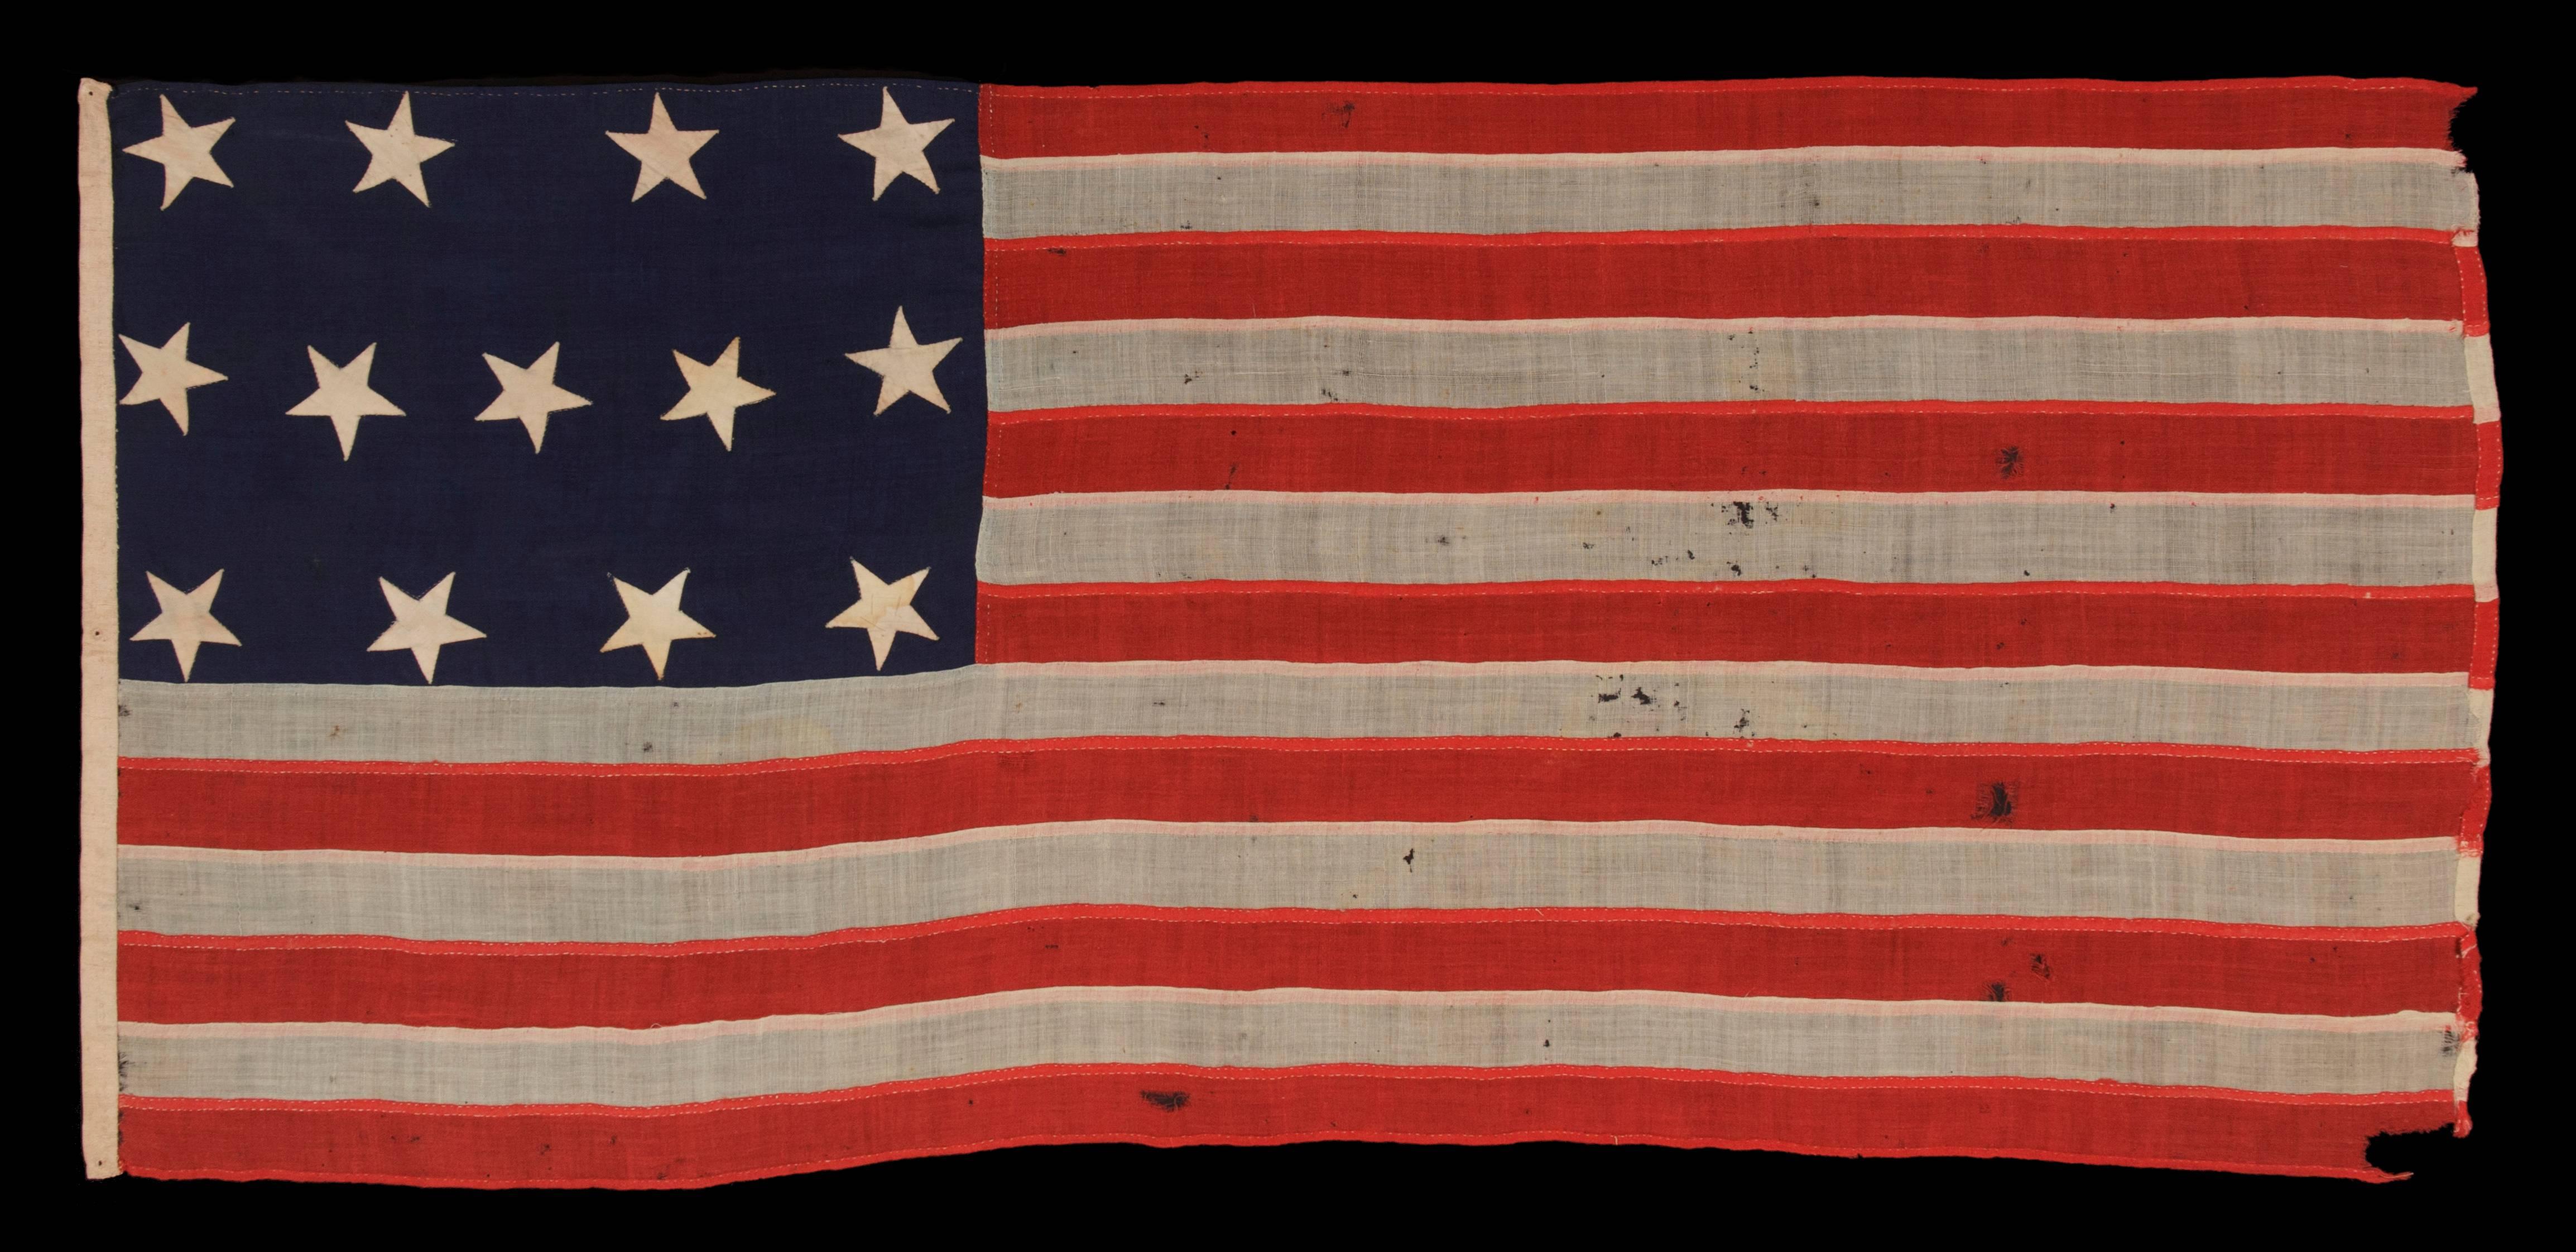 ENTIRELY HAND-SEWN, U.S. NAVY SMALL BOAT ENSIGN OF THE CIVIL WAR PERIOD, WITH 13 STARS IN A 4-5-4 CONFIGURATION, IN THE SMALLEST REGULATION SIZE RECORDED BY THE NAVY DURING THIS GENERAL ERA: 

U.S. Navy small boat ensign with 13 stars arranged in a